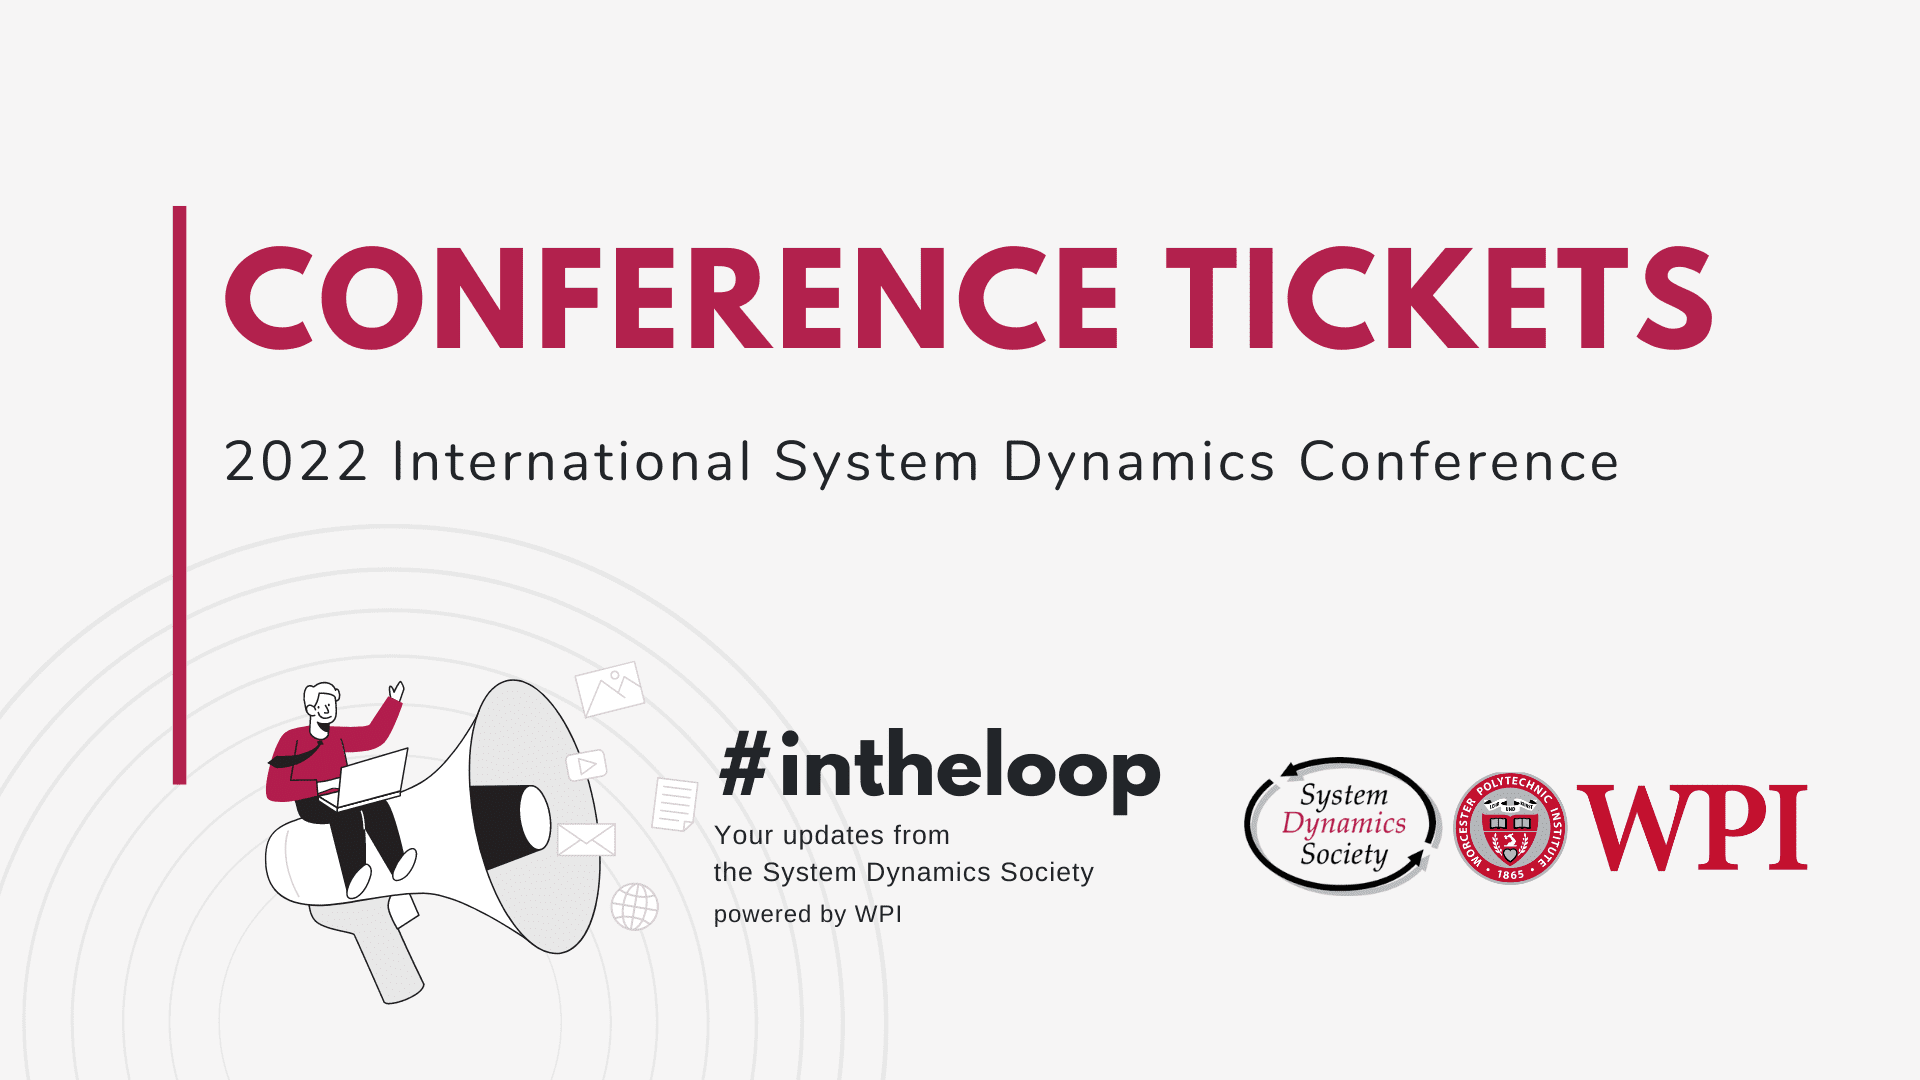 2022 International System Dynamics Conference Tickets #intheloop